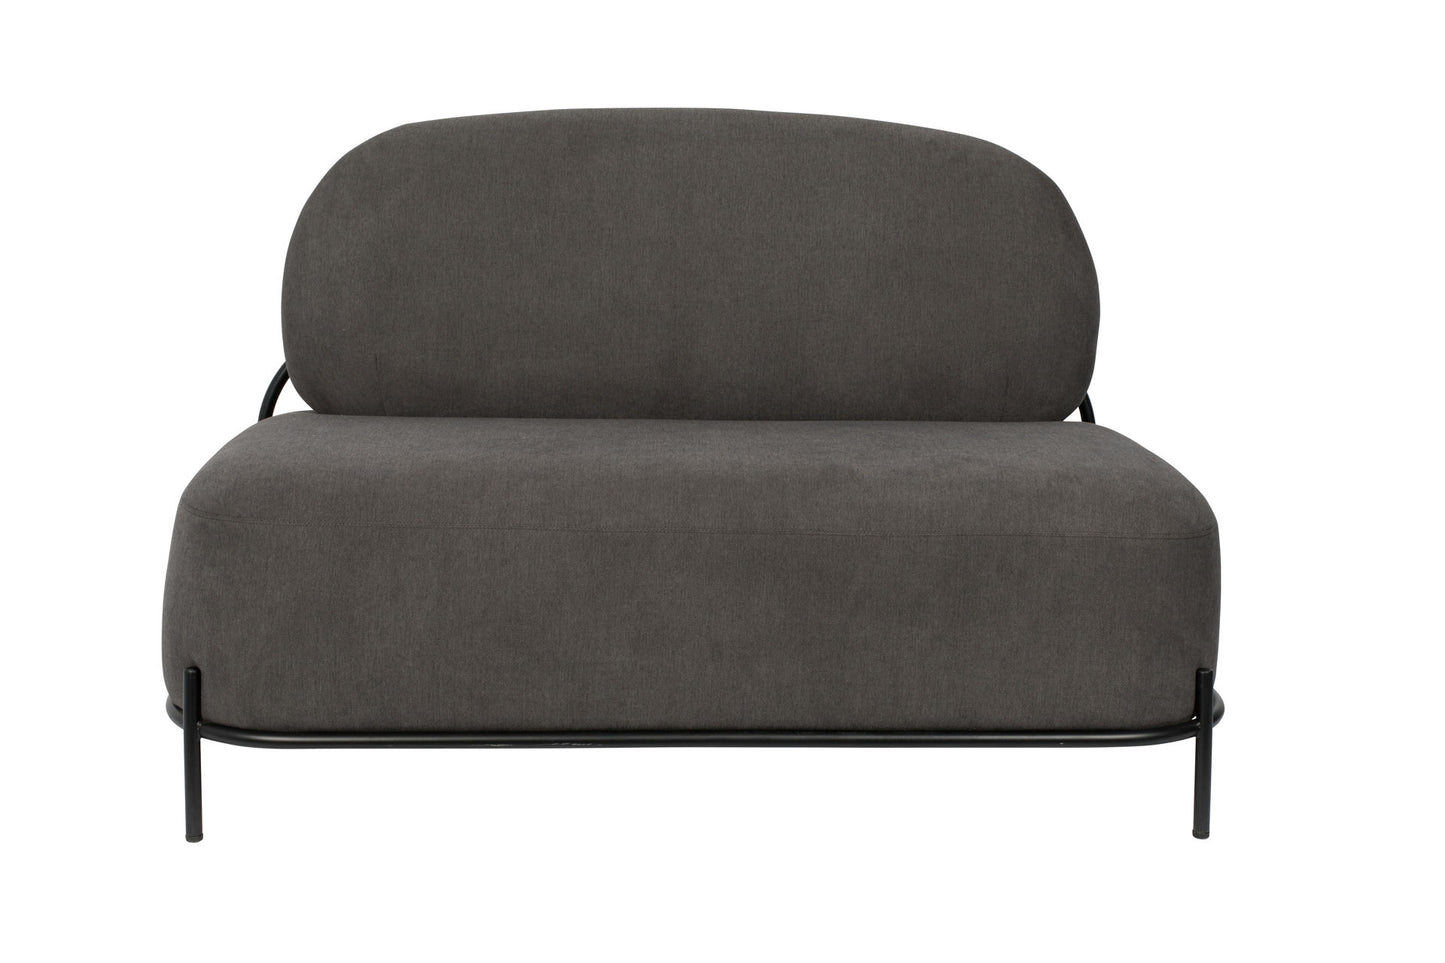 Nancy's Scottdale Lounge Chair - Industrial - Gray - Polyester, Plywood, Iron - 71.5 cm x 125 cm x 77 cm